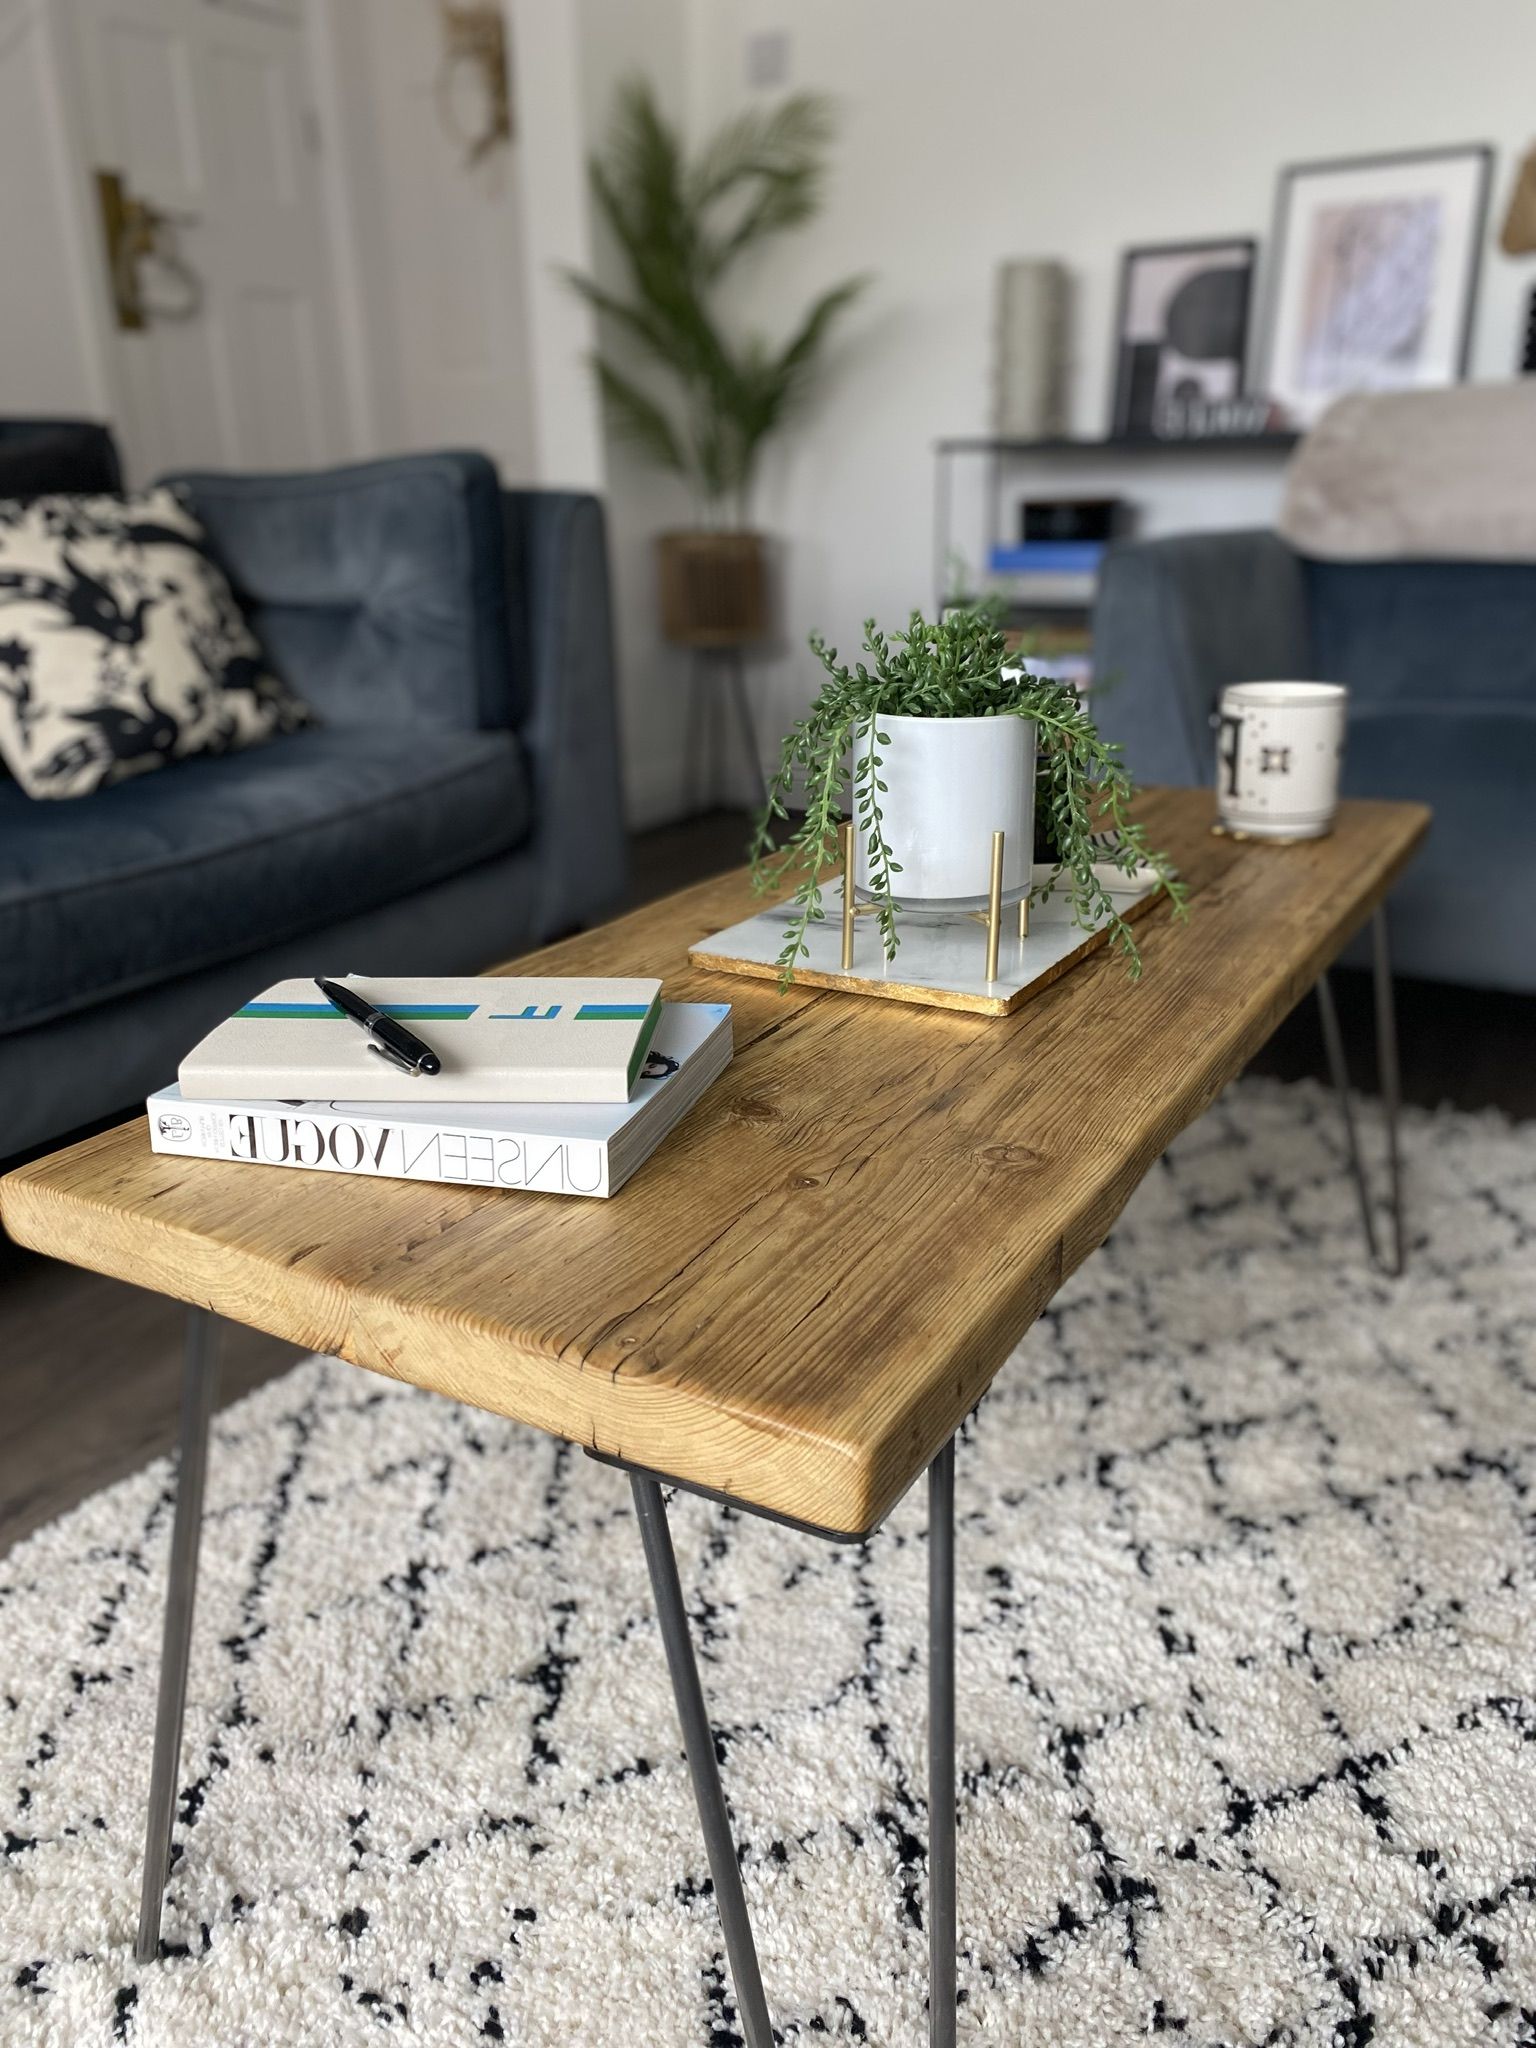 Widely Used Matthew – Modern Rustic Reclaimed Wooden Coffee Table With Steel Industrial  Legs – The Dancing Woodman With Rustic Wood Coffee Tables (View 9 of 10)